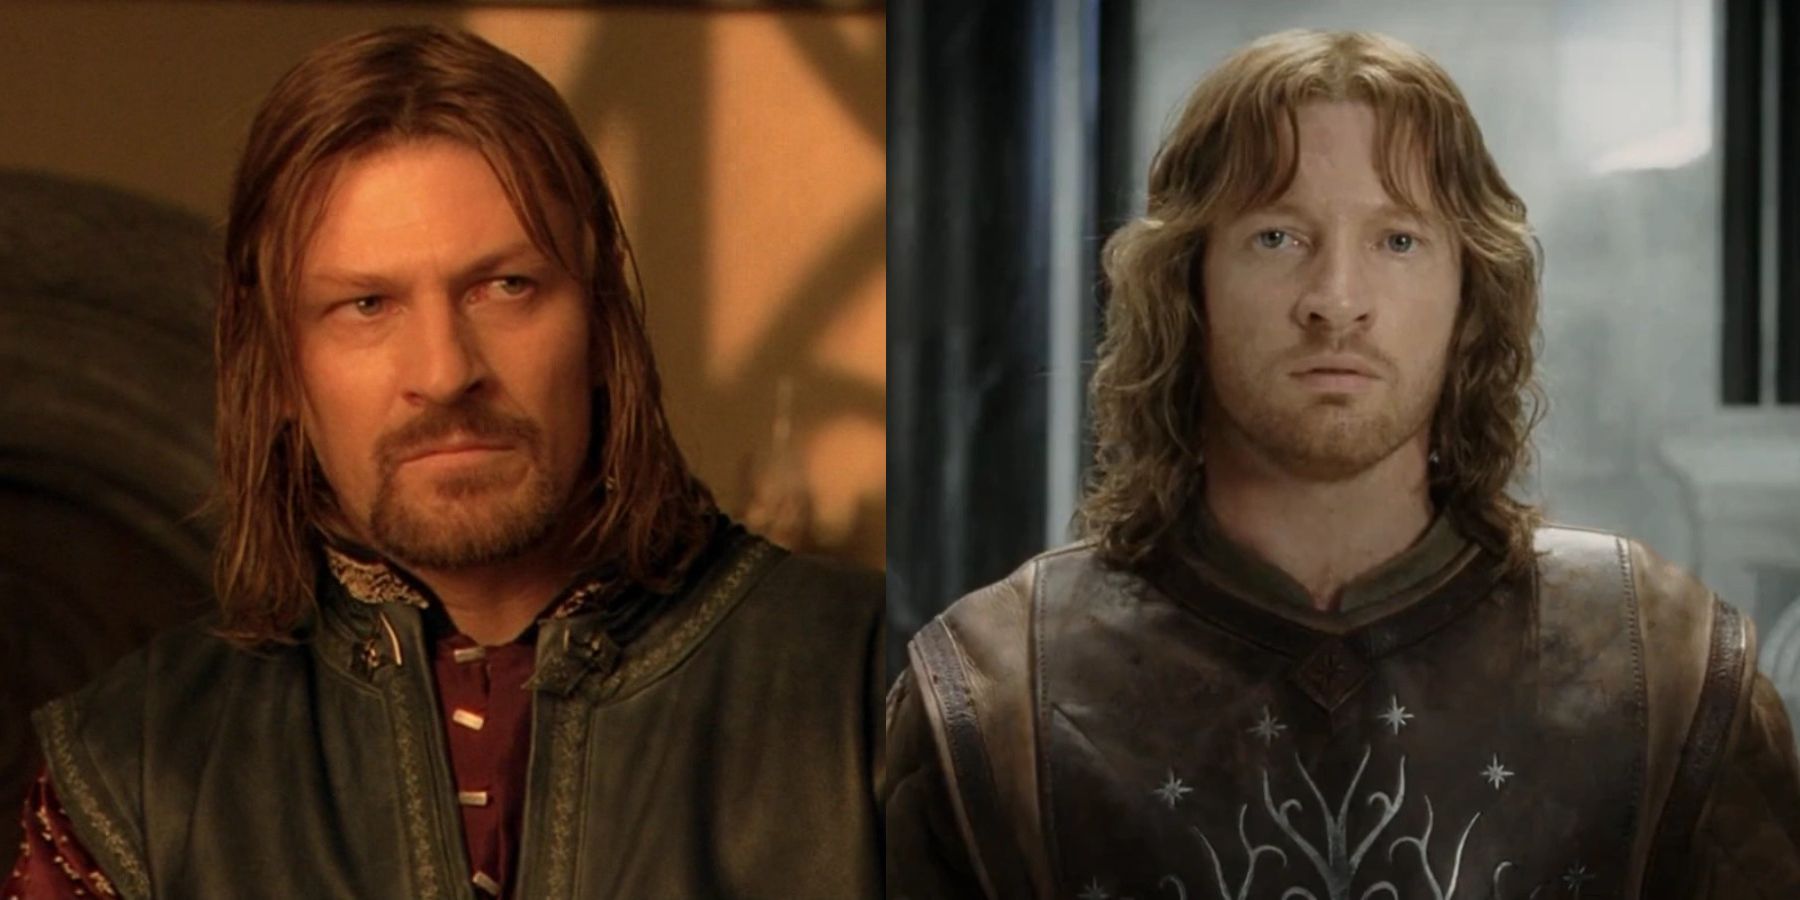 Boromir at Rivendell and Faramir at Minas Tirith in Lord of the Rings